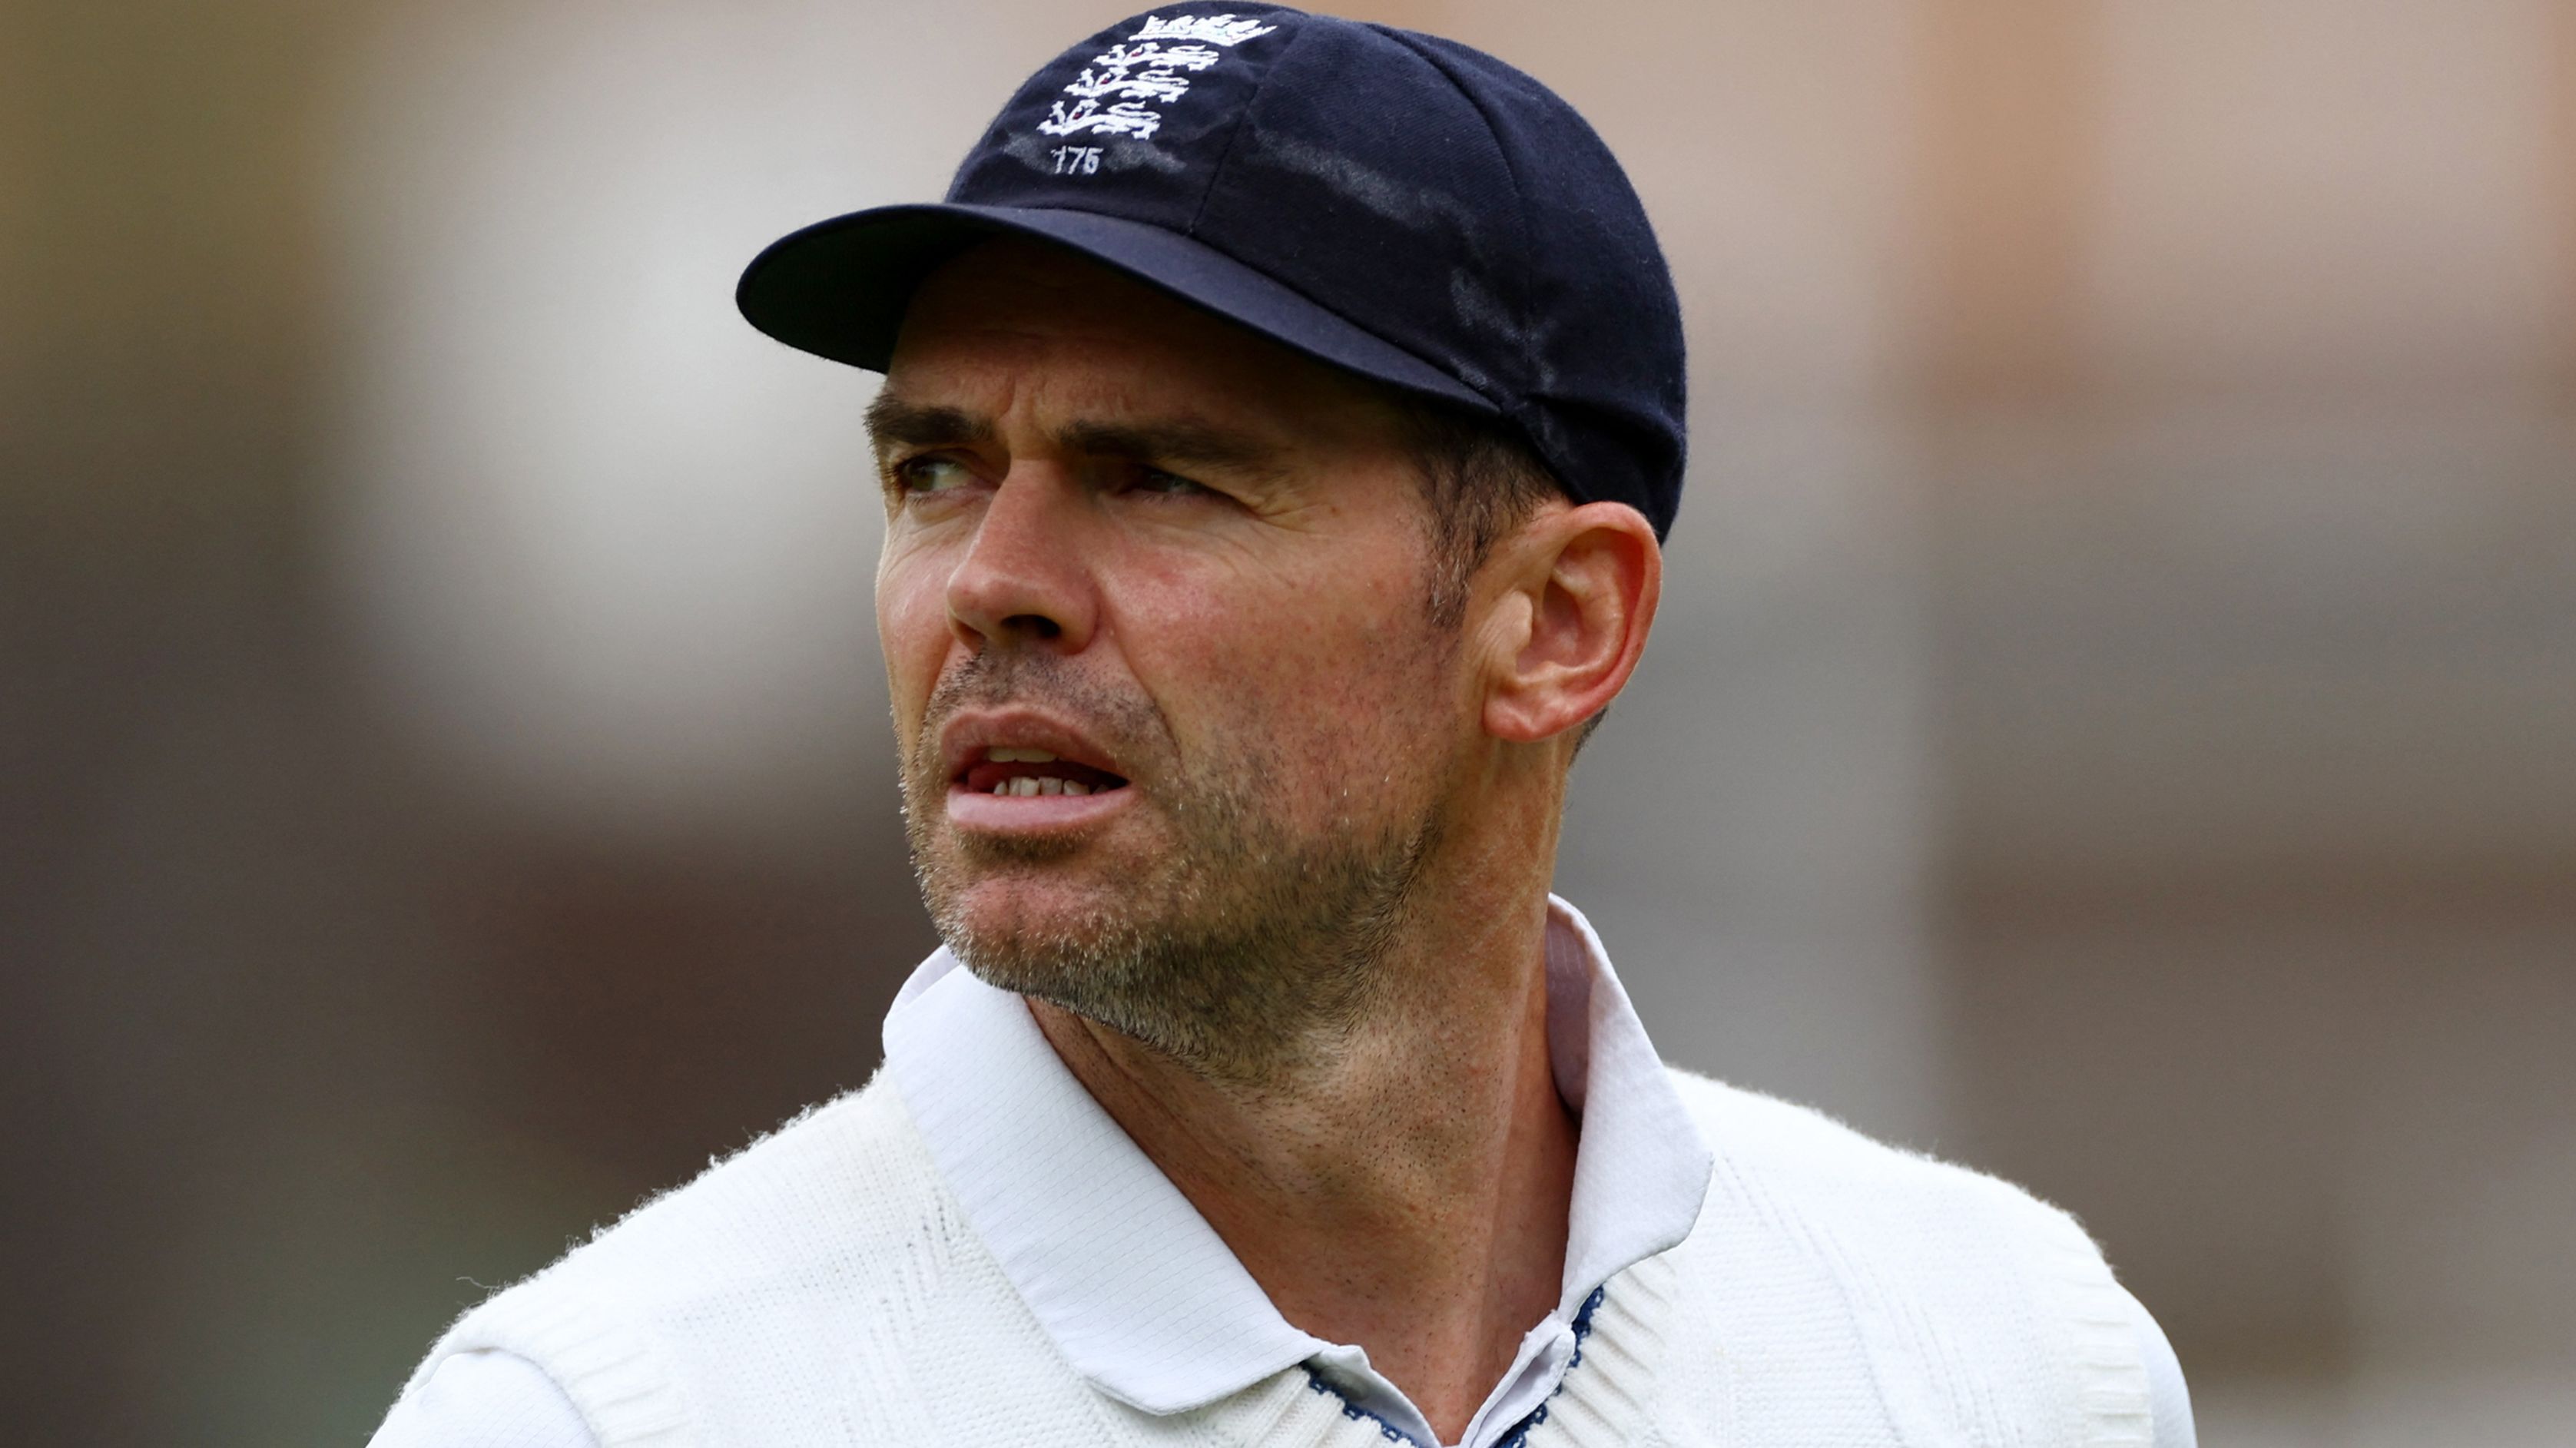 James Anderson will notch up his 22nd consecutive season of Test cricket for England